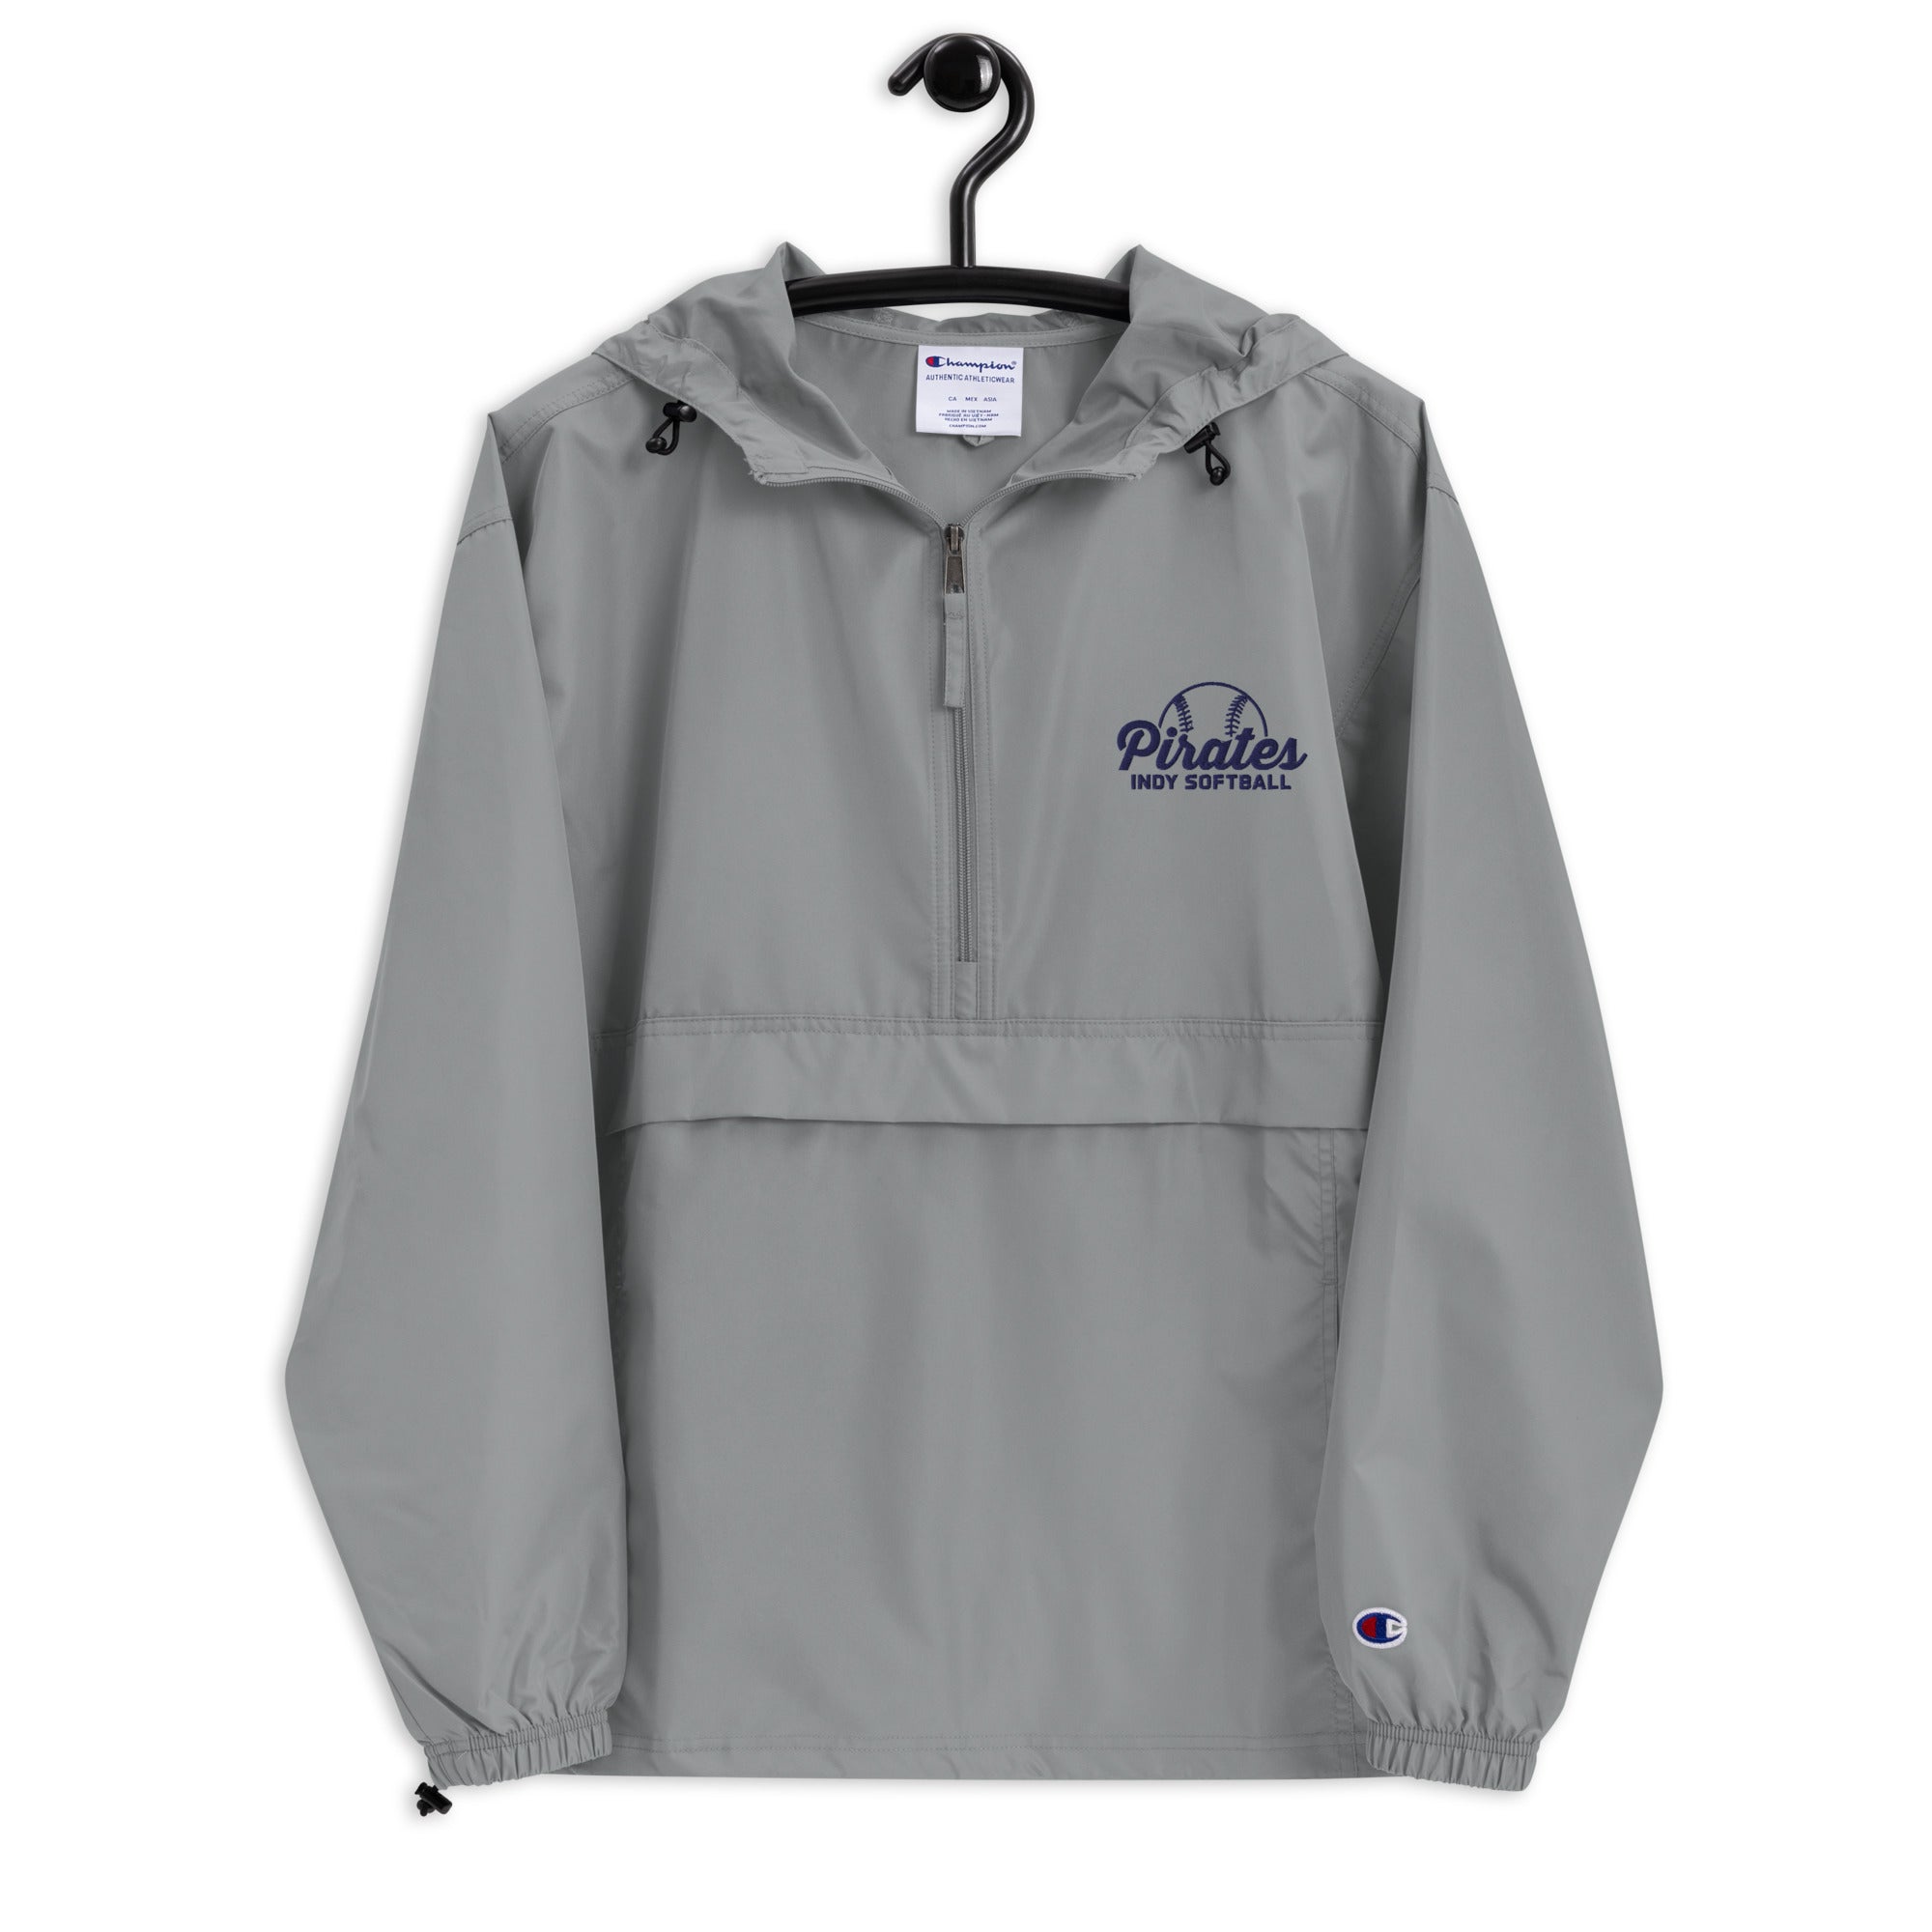 Indy Softball Embroidered Champion Packable Jacket